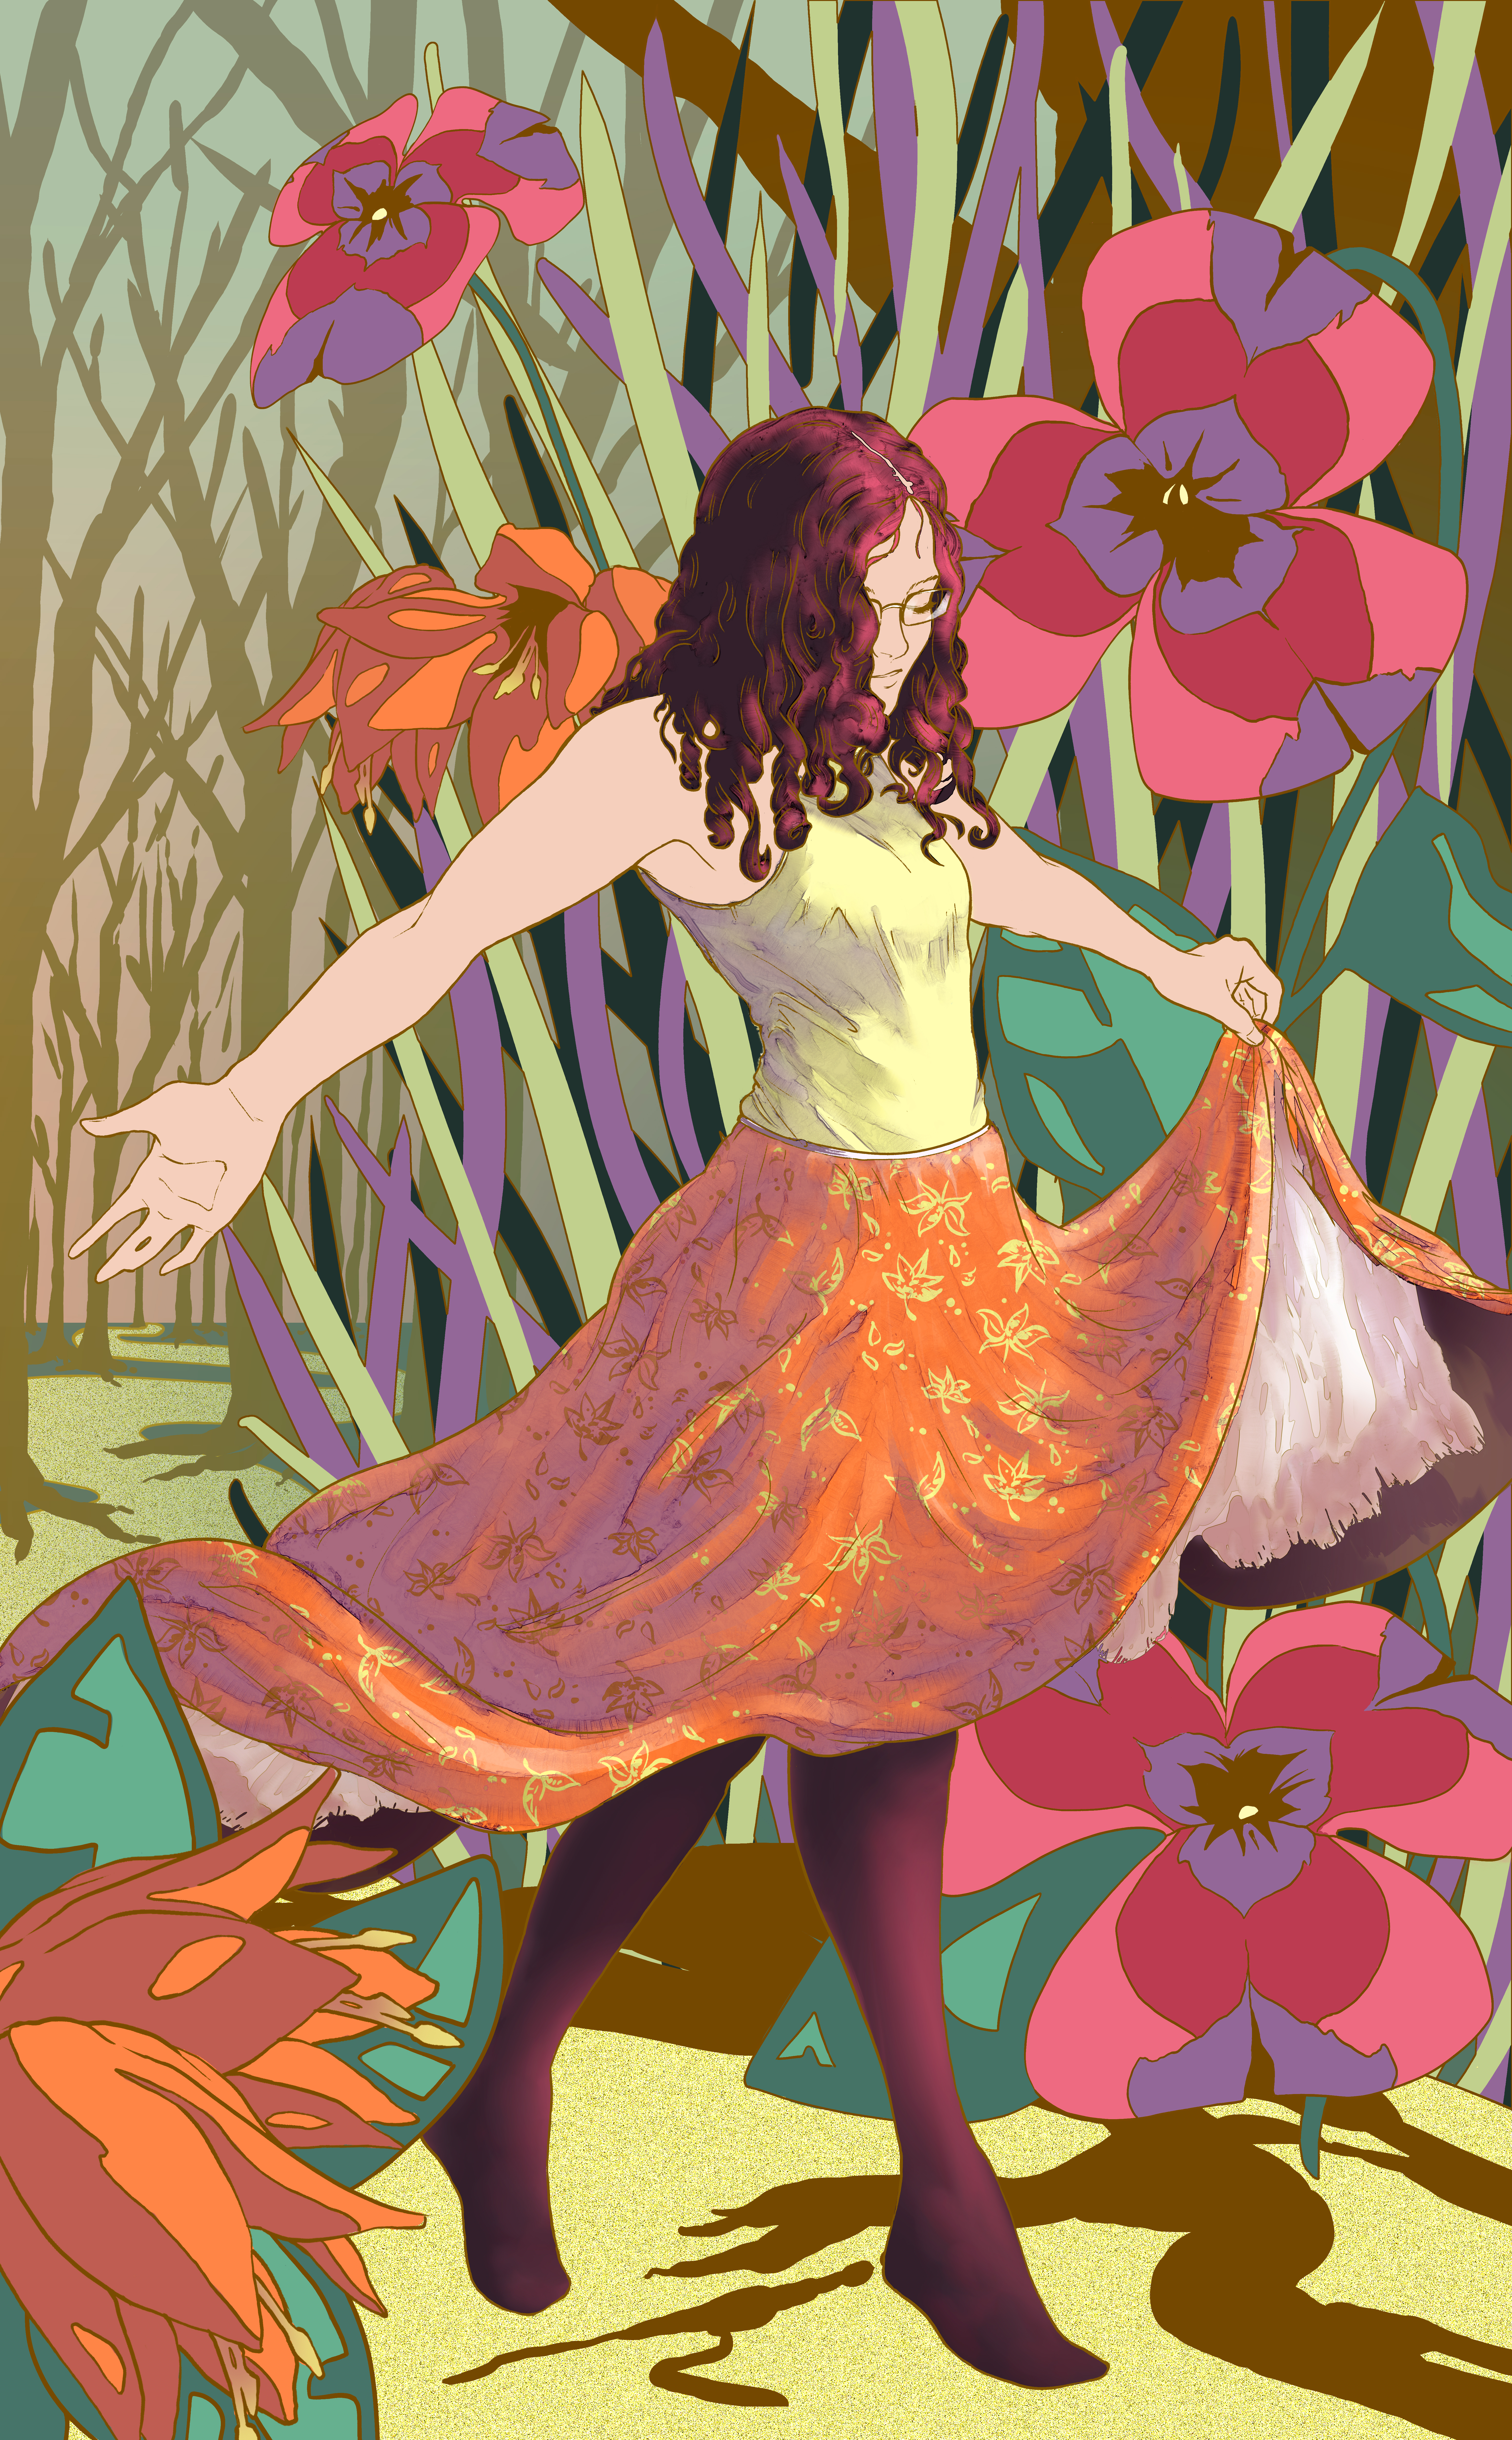 Colorful drawing of a woman among giant flowers